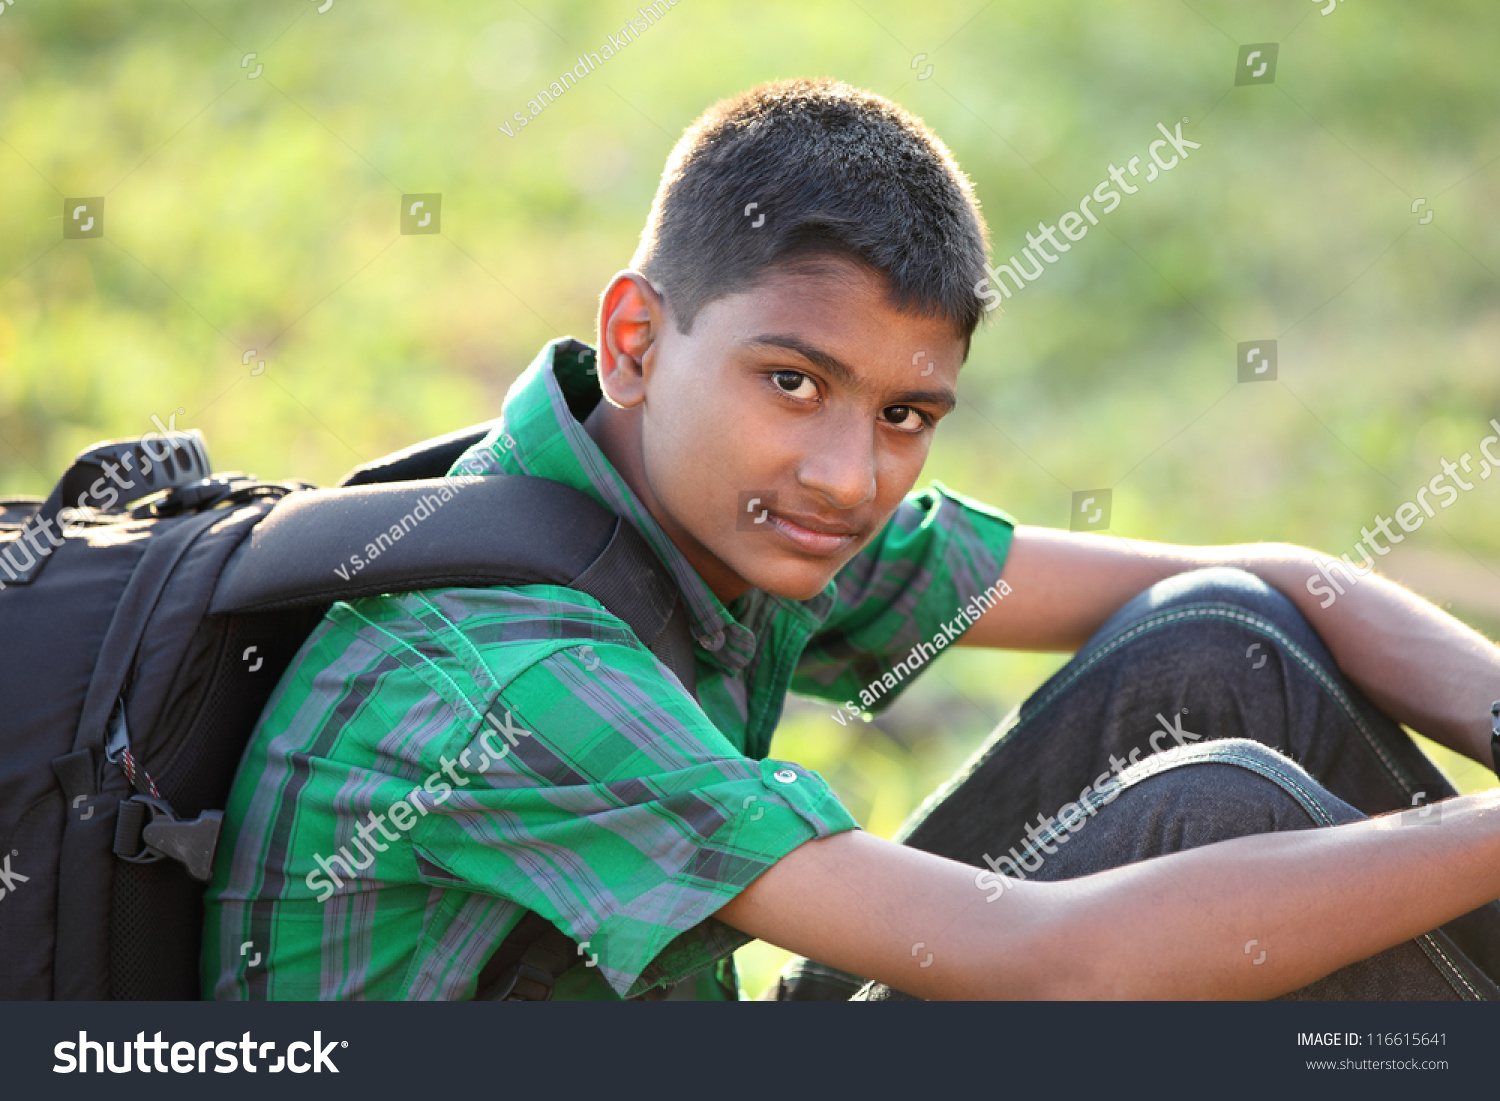 Indian Teen Boy With Bag In Outdoor Stock Photo 1166